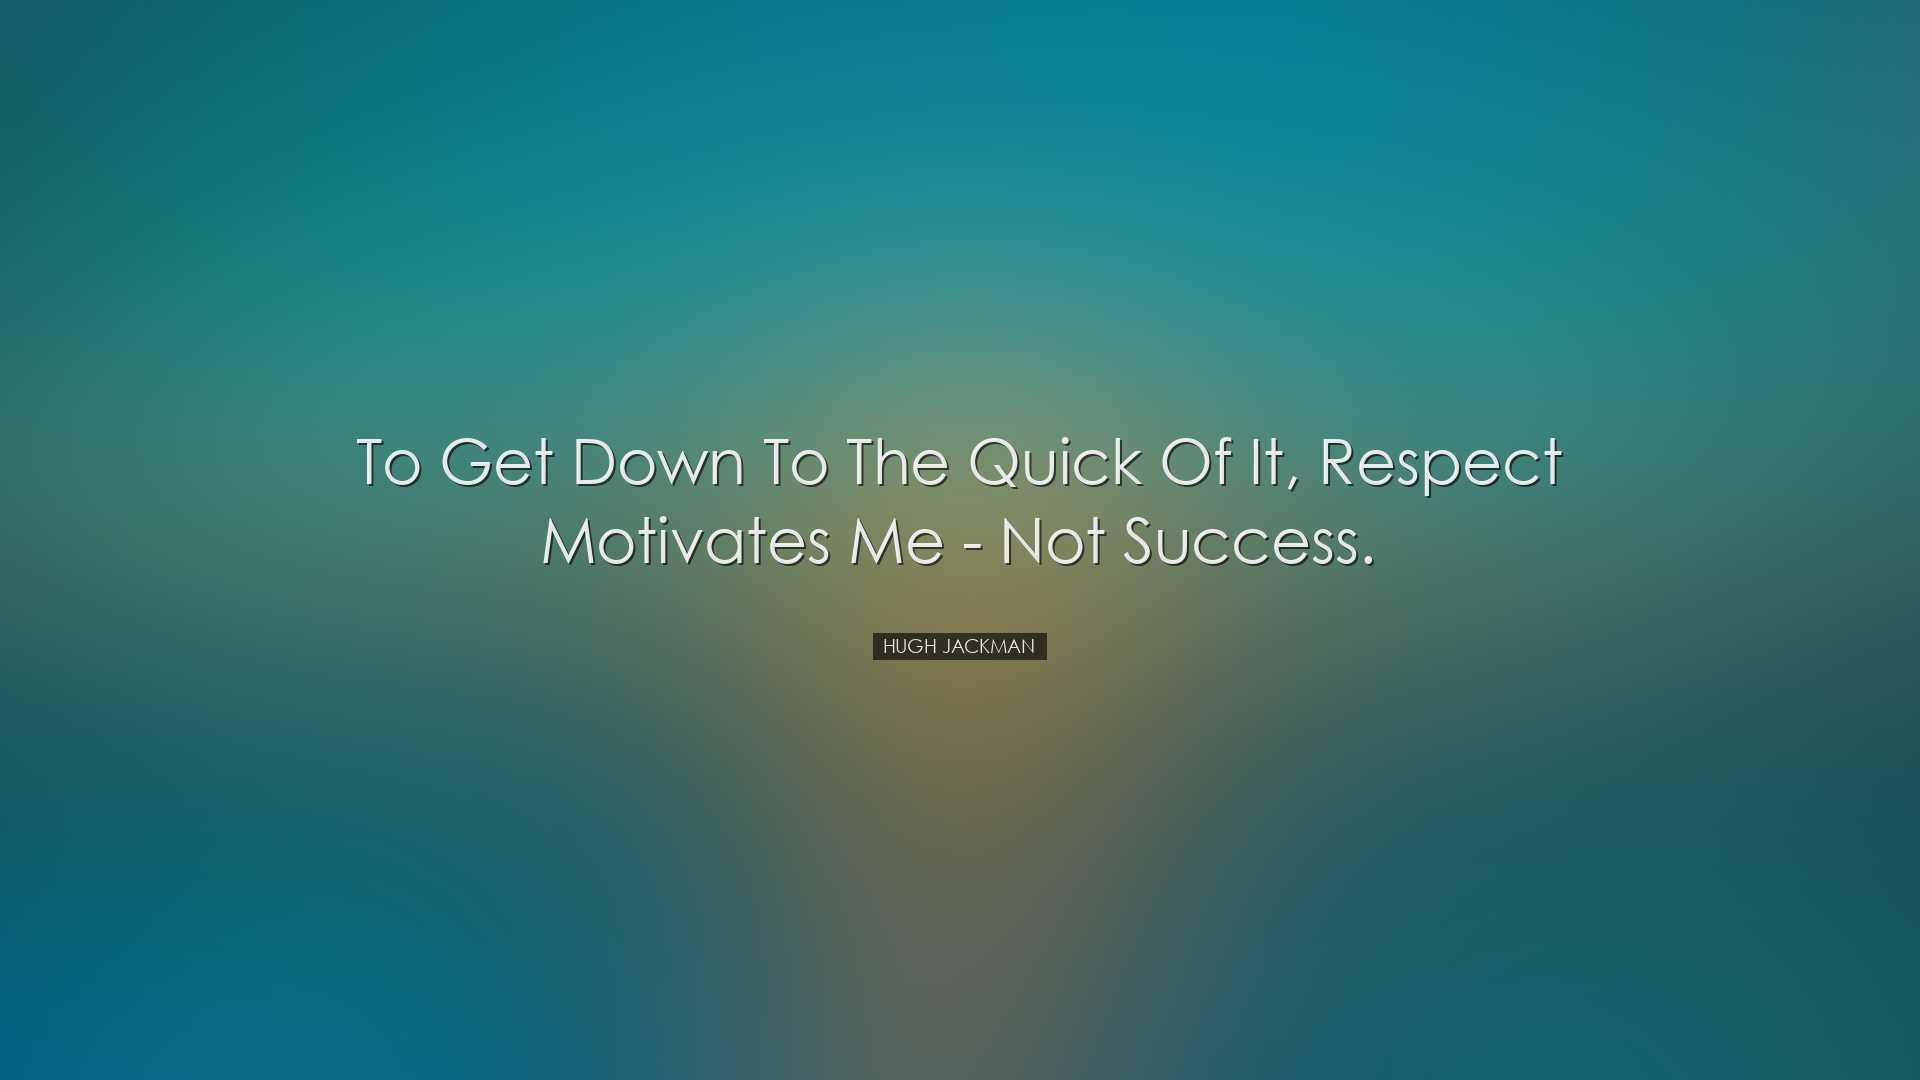 To get down to the quick of it, respect motivates me - not success